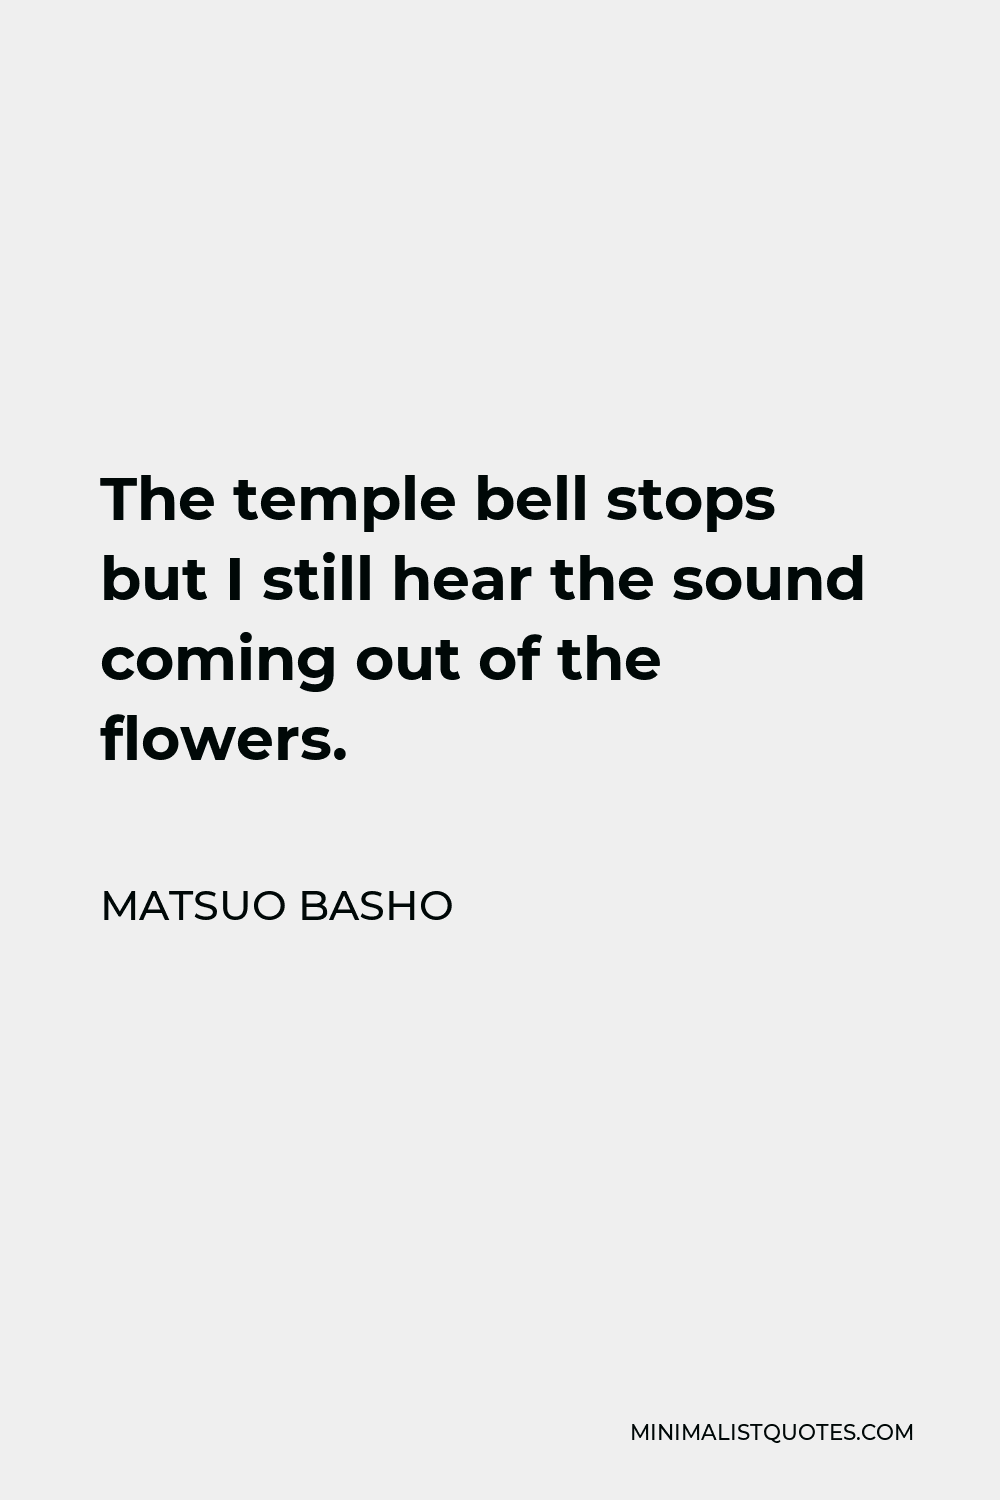 Matsuo Basho Quote - The temple bell stops but I still hear the sound coming out of the flowers.